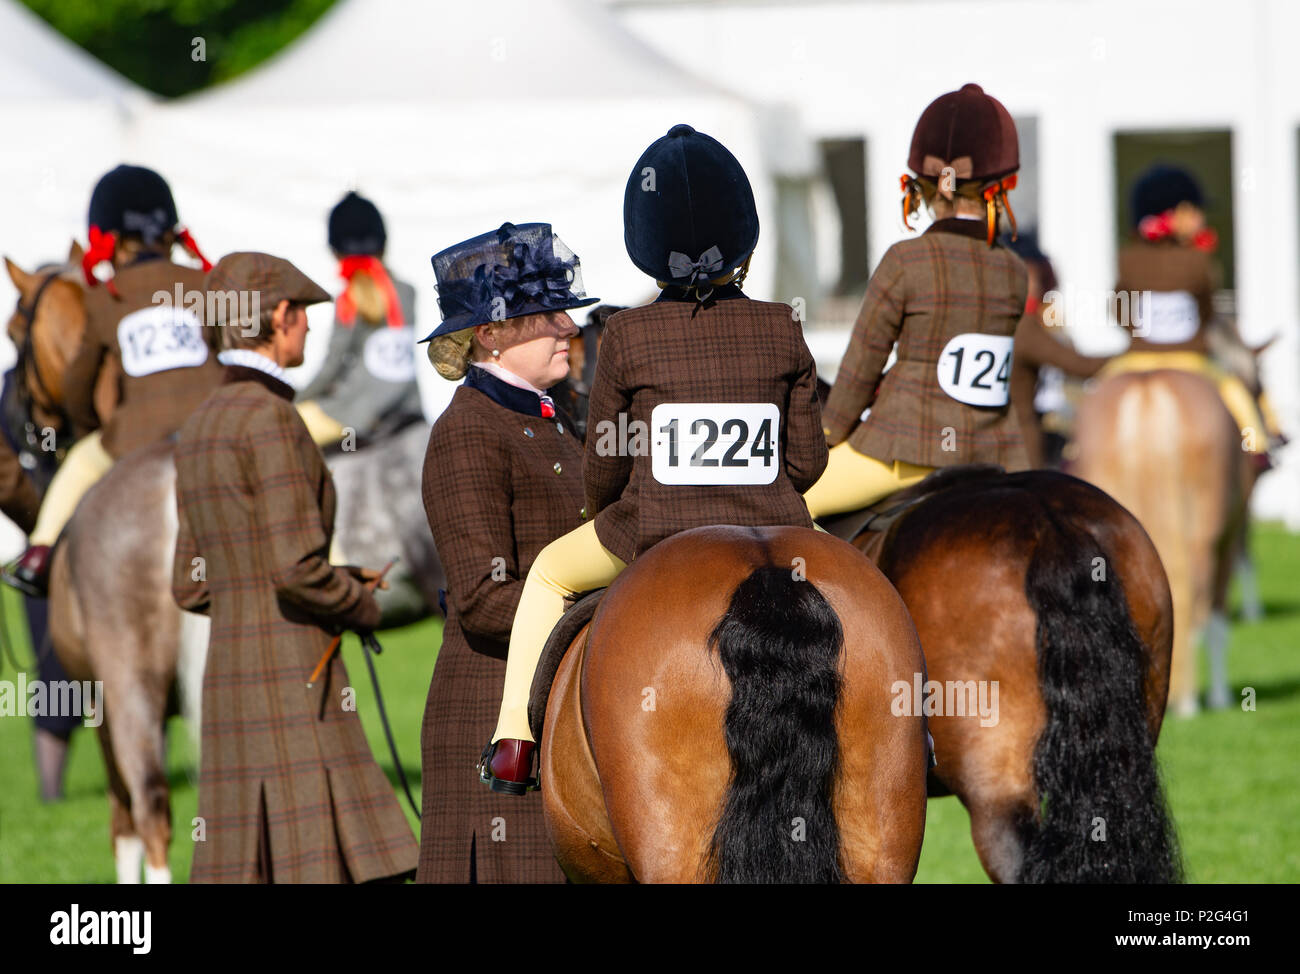 Malvern, Worcestershire, UK. 15th June 2018. Judging starts in the equestrian classes on the first day of the Royal Three Counties Show, Malvern, Worcestershire. Credit: John Eveson/Alamy Live News Stock Photo